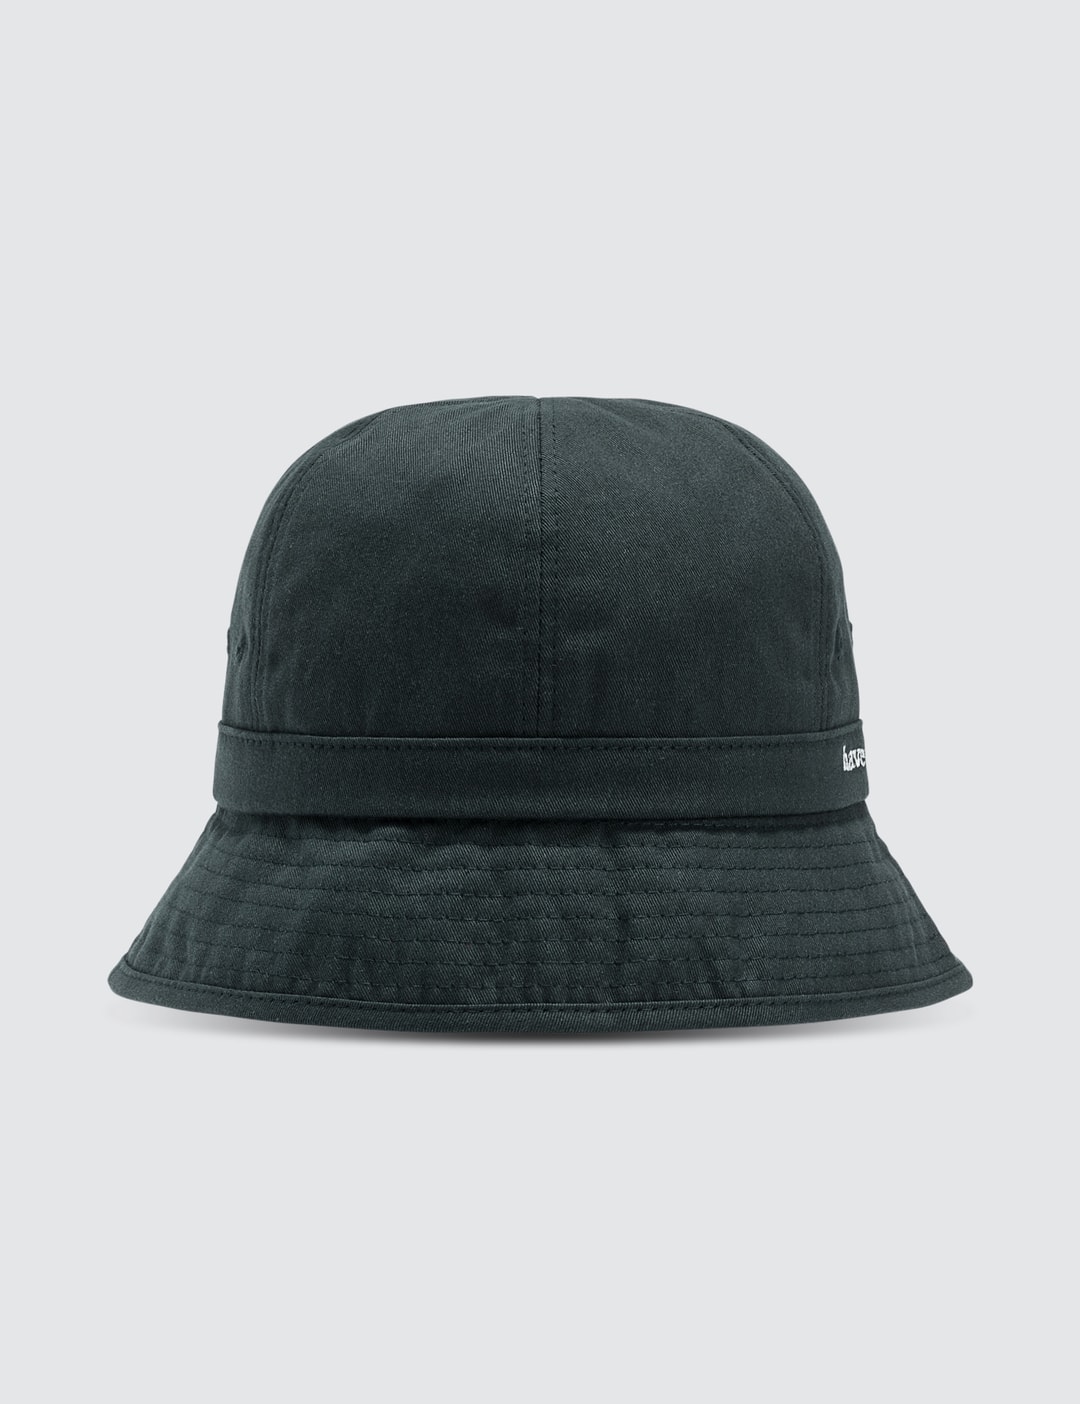 Have A Good Time - Logo Bucket Hat | HBX - Globally Curated Fashion and ...